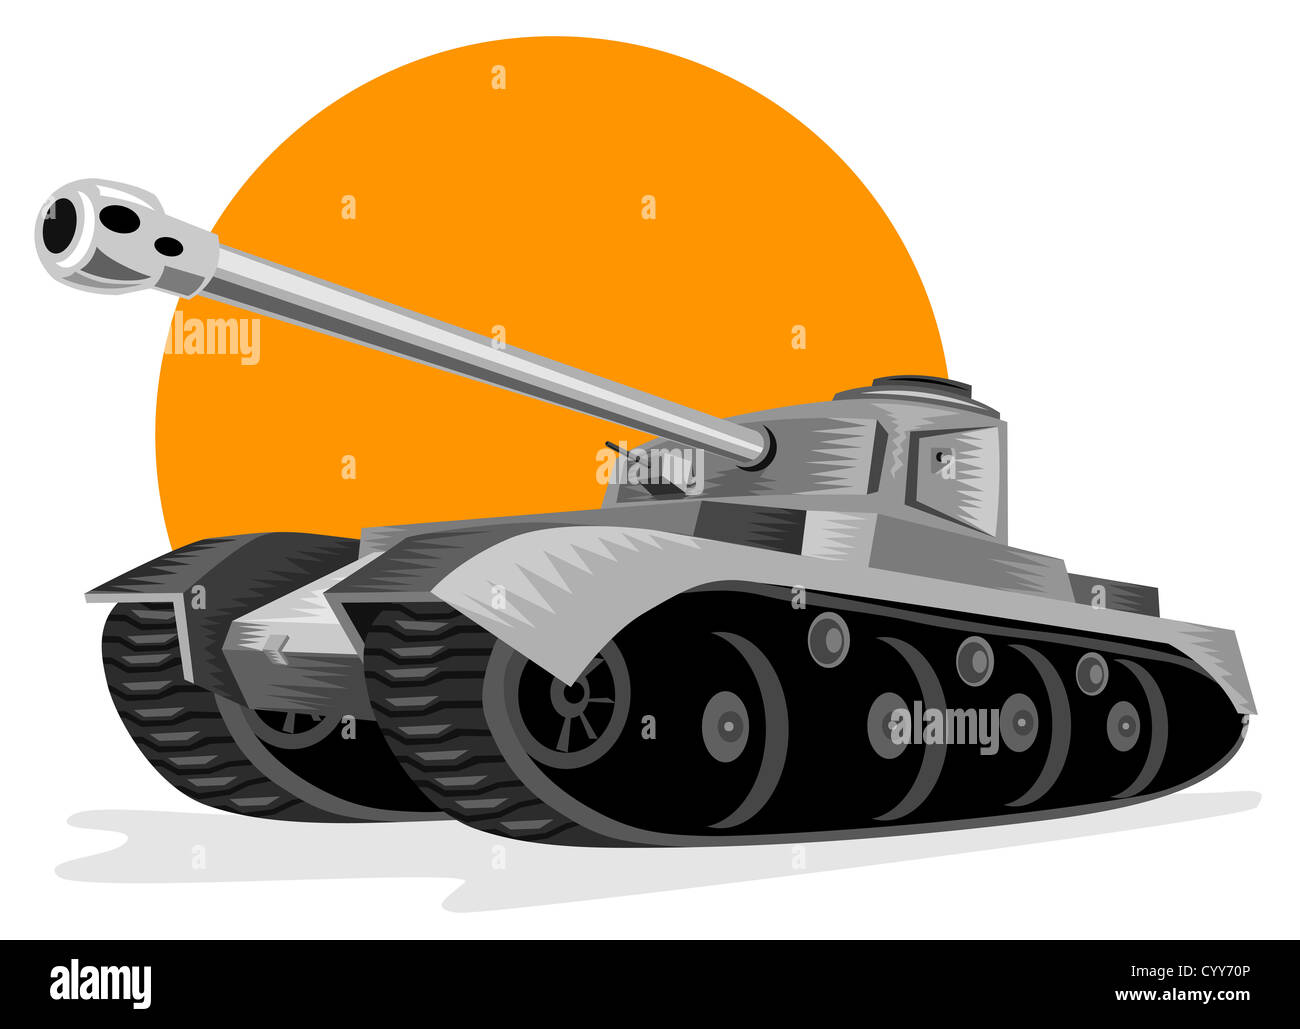 Illustration of a world war two german panzer battle tank done in retro style. Stock Photo